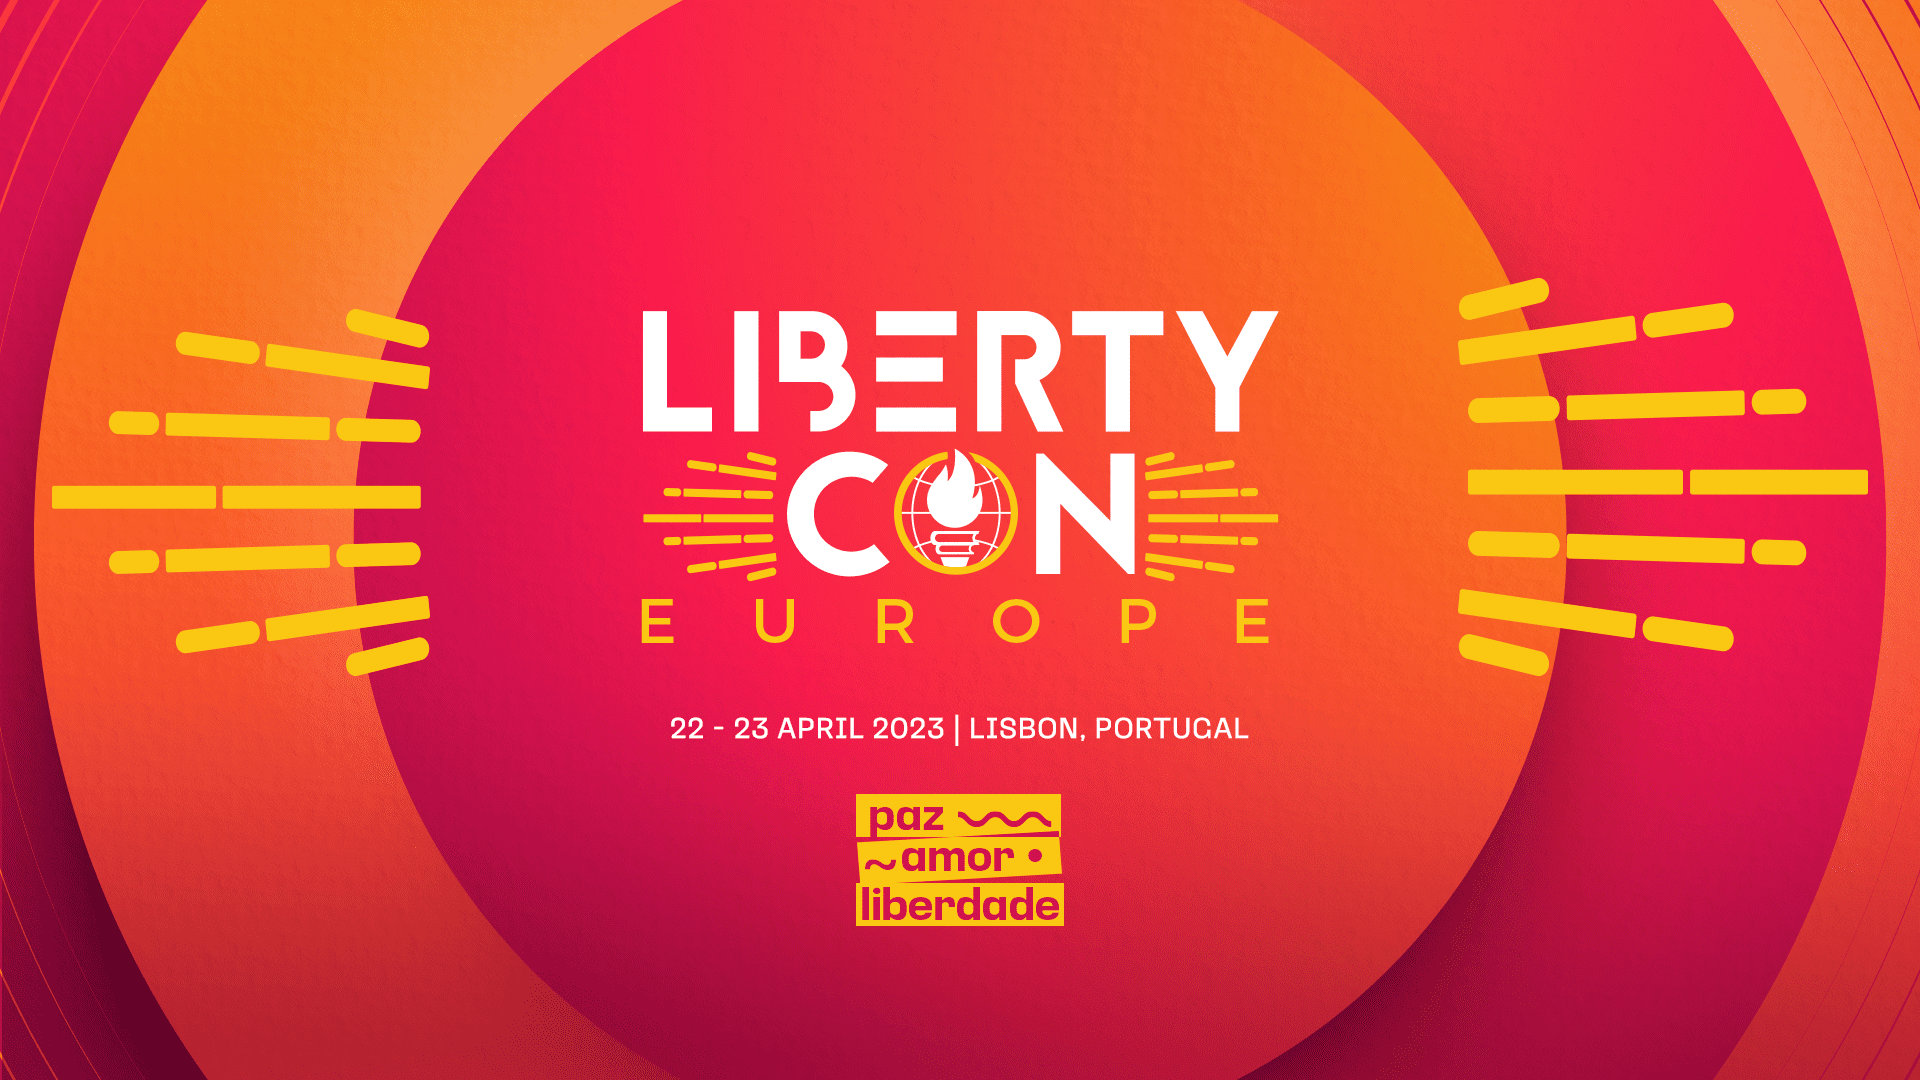 With a confirmed lineup of over 20 so far and many more to come, here is just a small selection of the fantastic speakers you don’t want to miss at LibertyCon Europe this year